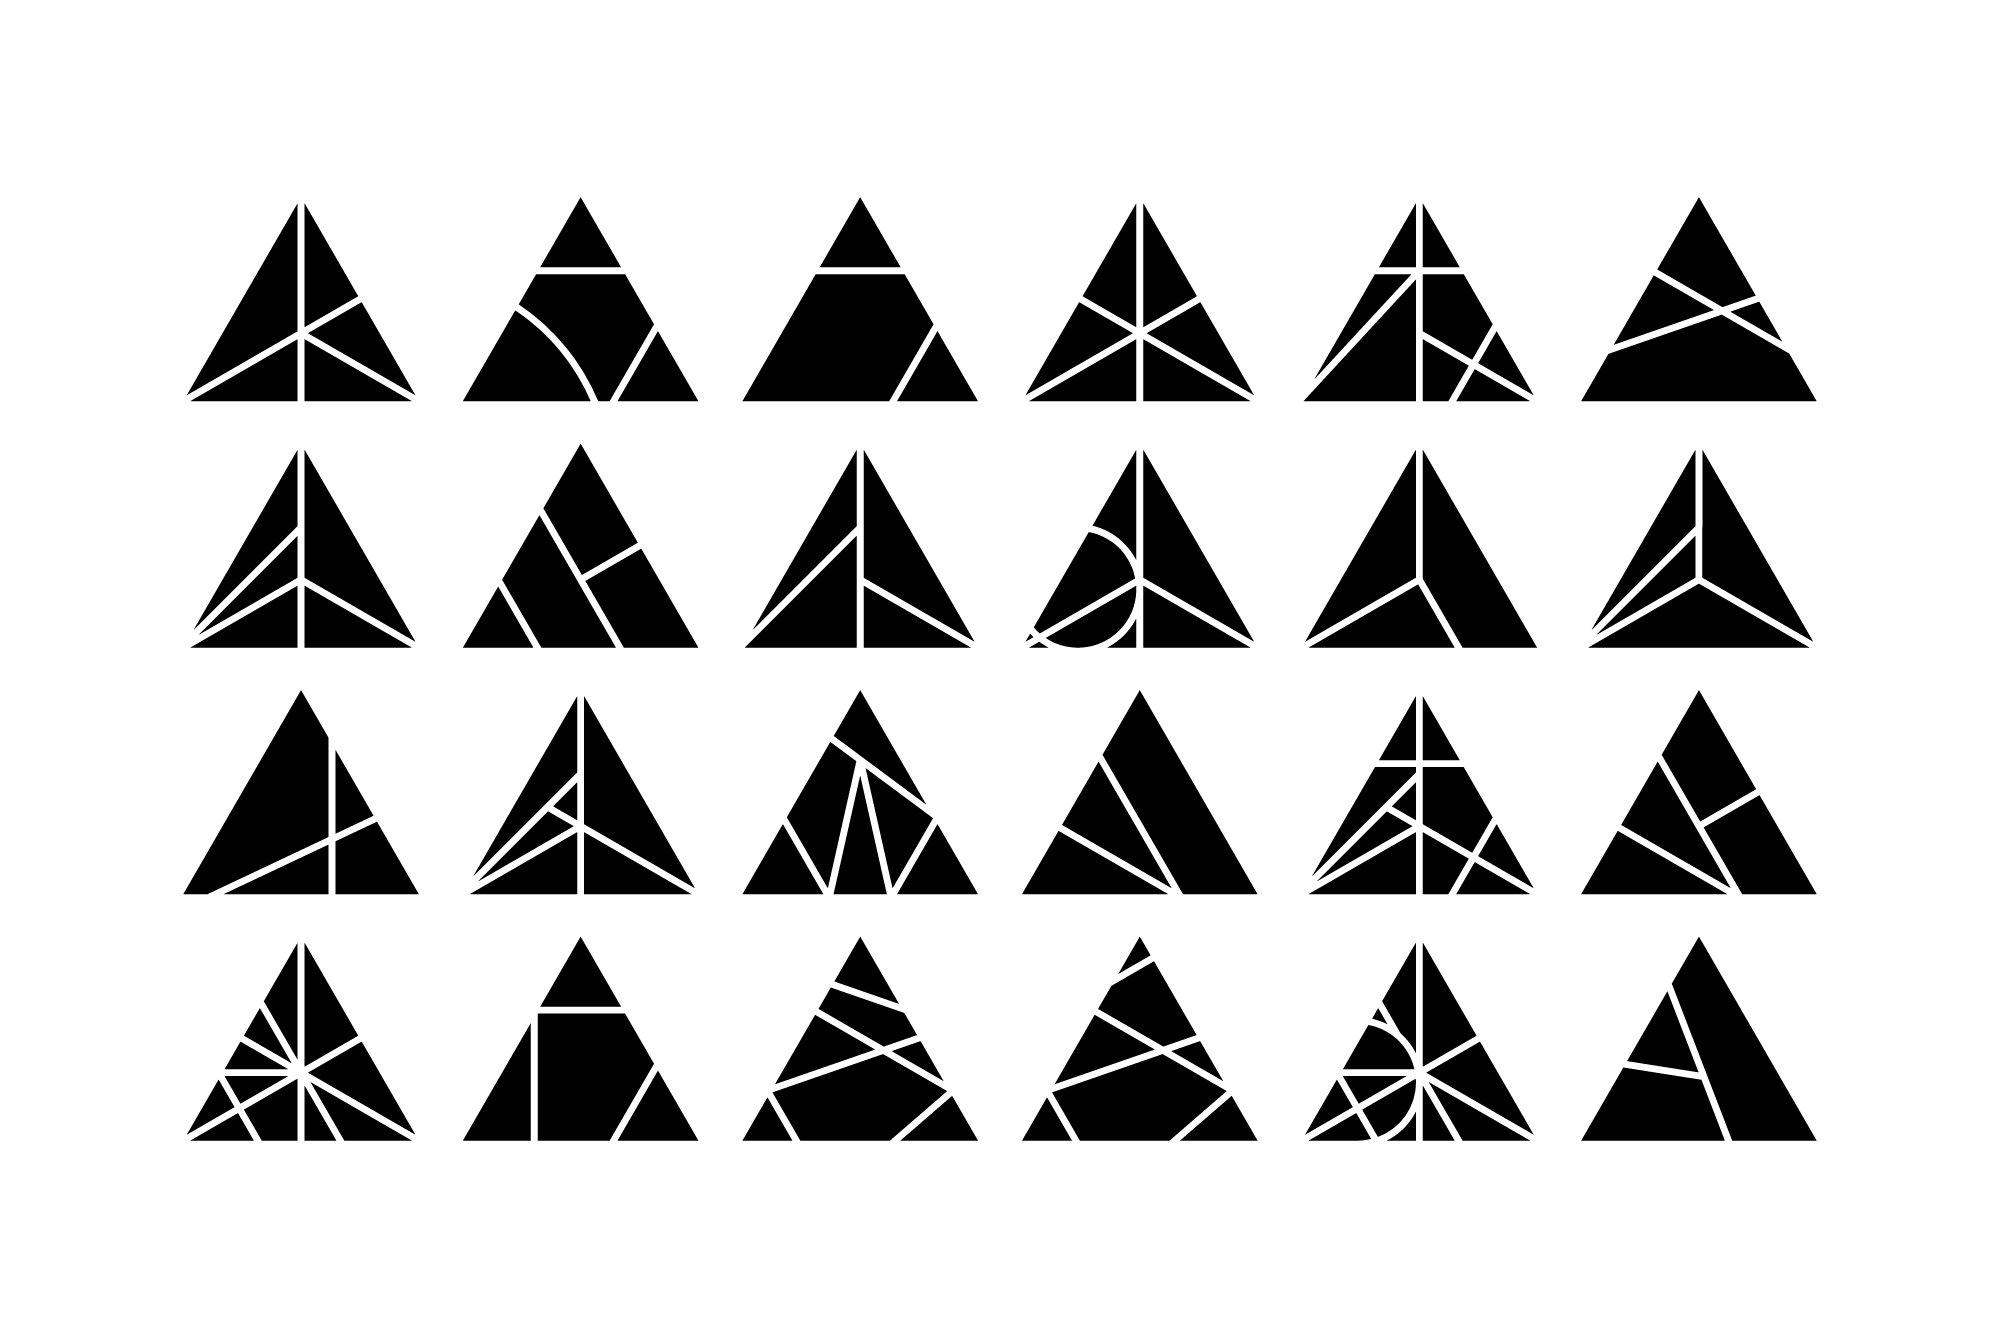 Classic black triangles with white lines.